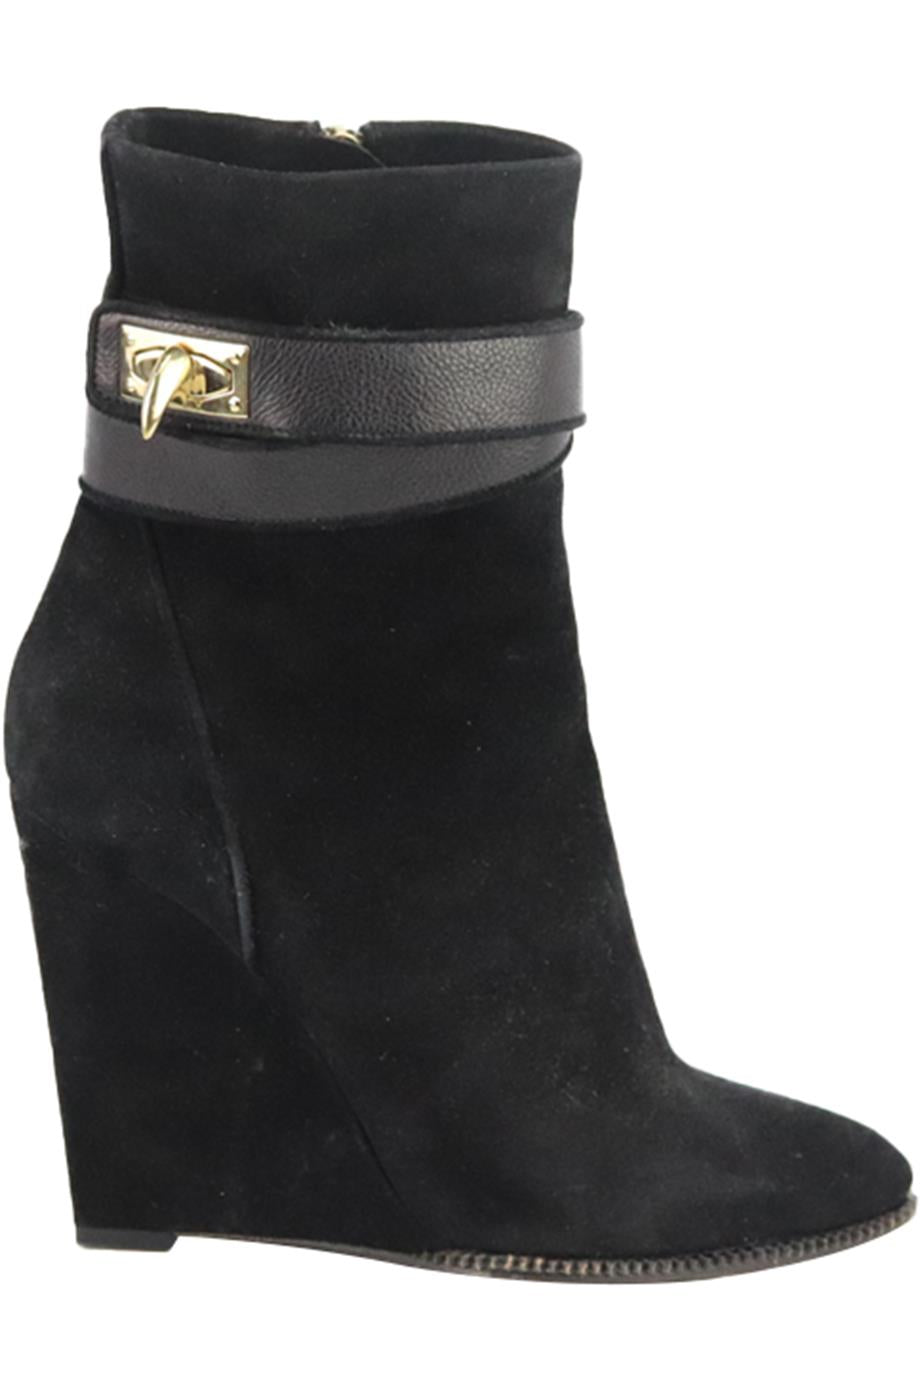 GIVENCHY SHARK LOCK SUEDE WEDGE ANKLE BOOTS EU 38 UK 5 US 8